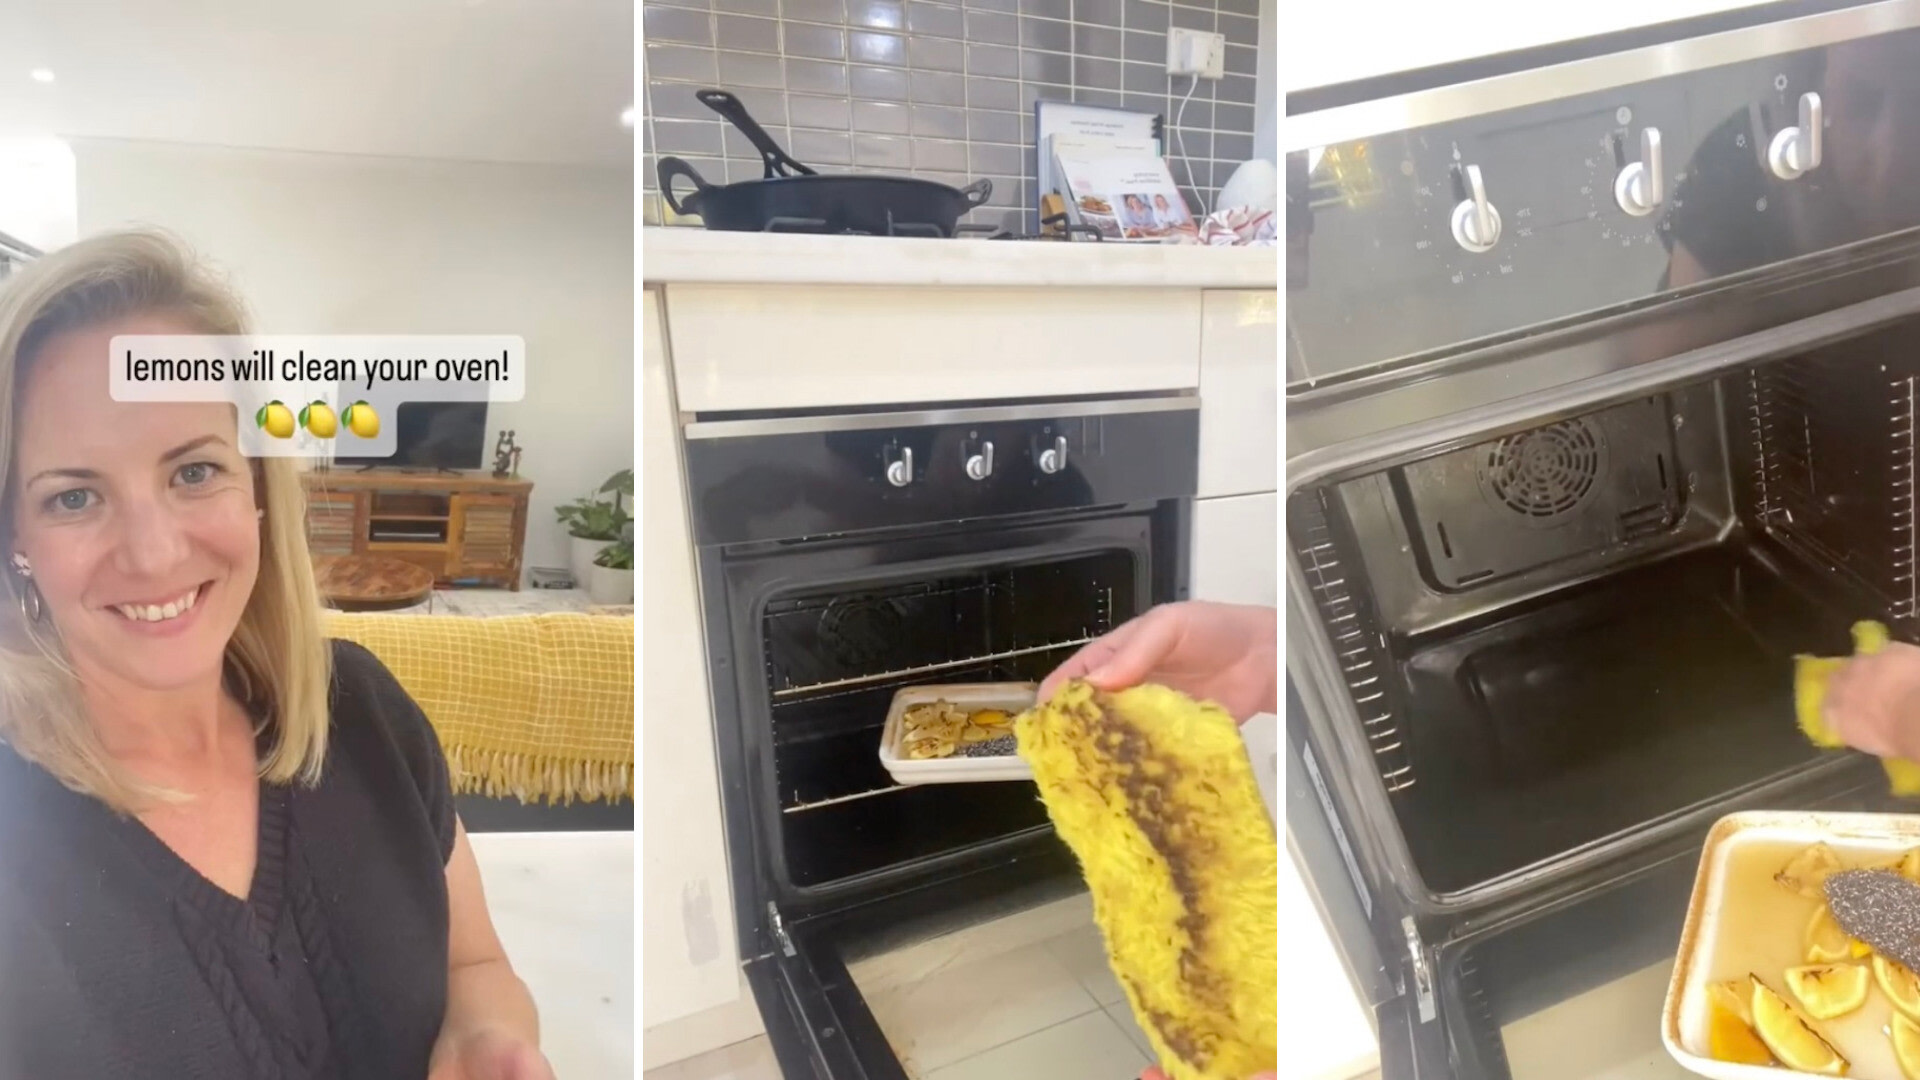 7 Oven Cleaning Hacks That Actually Work, Backed by Experts